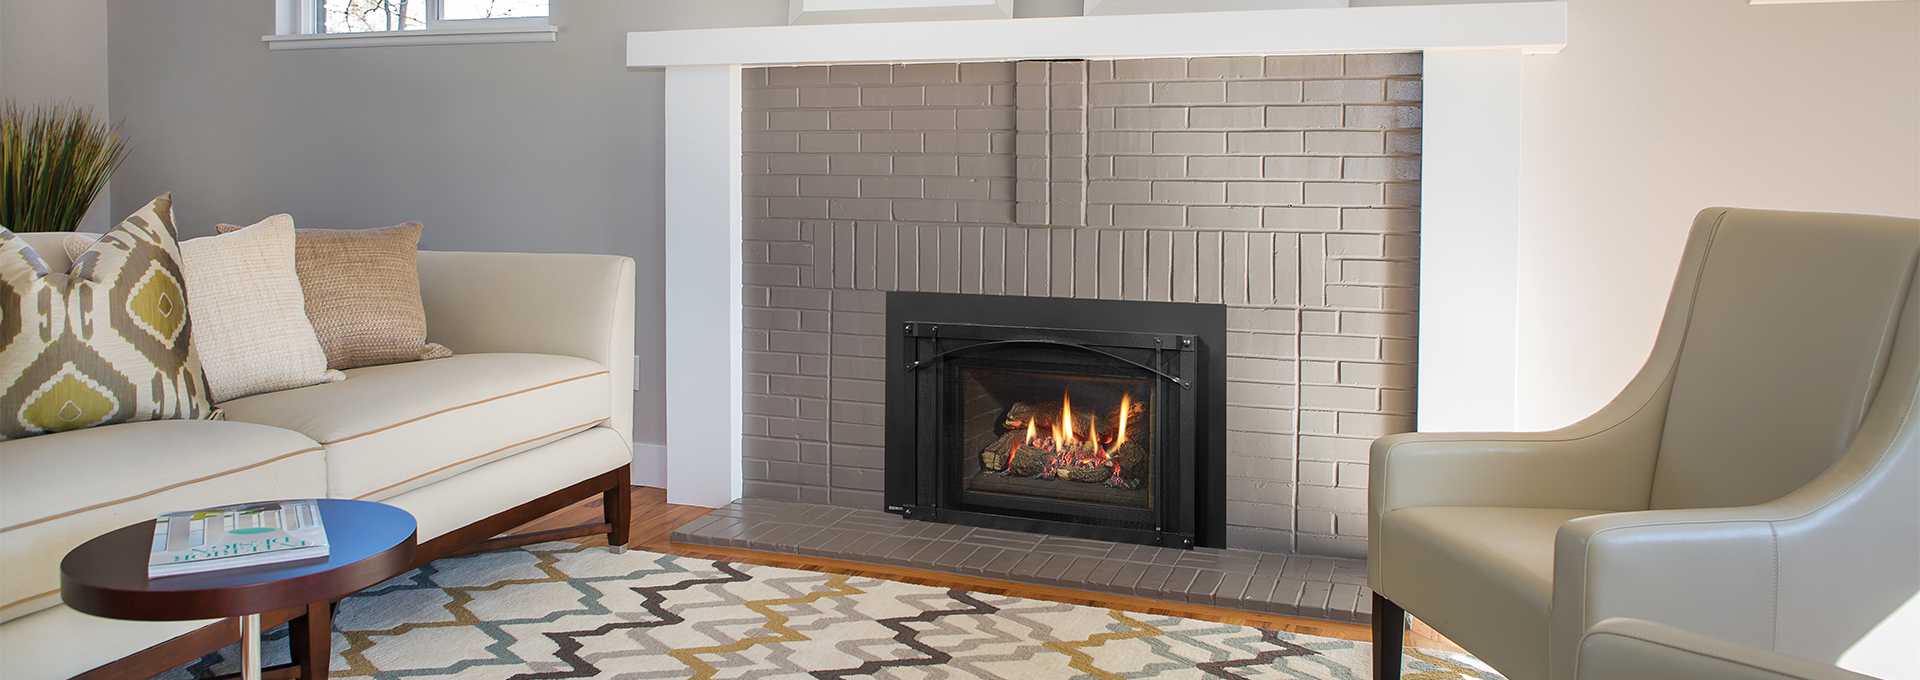 Top 8 Fireplace Insert Trends of 2017 